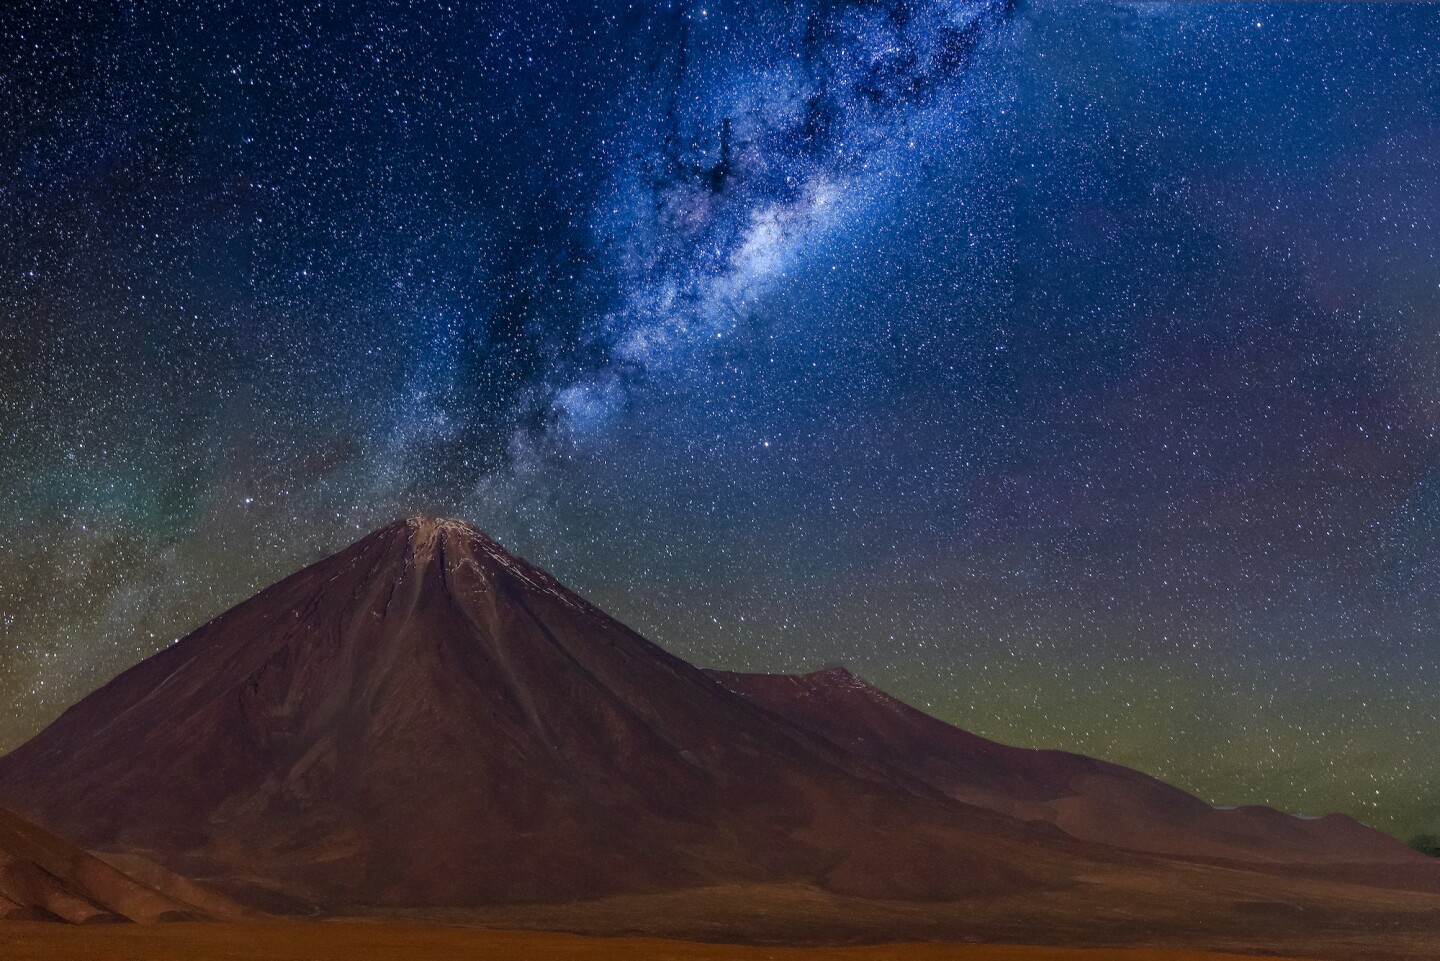 <h2>9. Atacama Desert and Elqui Valley, Chile</h2> <p>Low rainfall, high altitude, and scant light pollution in <a class="Link" href="https://www.afar.com/travel-guides/chile/guide" rel="noopener">Chile’s</a> greater Atacama–Elqui region make it the “North Star” of astro-tourism—at least here on Earth. The 90,000-acre Elqui Valley, which is also known for its wine production, became the first-ever International Dark Sky Sanctuary in 2015. (It’s named the <a class="Link" href="https://www.darksky.org/our-work/conservation/idsp/sanctuaries/aura/" rel="noopener">Gabriela Mistral Dark Sky Sanctuary</a> in honor of the 20th-century Nobel Prize–winning poet Gabriela Mistral, who spent her childhood in the Chilean region.) About five hours north of the Elqui Valley, the tourist-friendly town of San Pedro de Atacama offers a mix of budget hostels and luxury accommodations in the Atacama Desert, such as the sustainable <a class="Link" href="https://www.explora.com/atacama-lodge/" rel="noopener">Atacama Lodge</a>.</p>